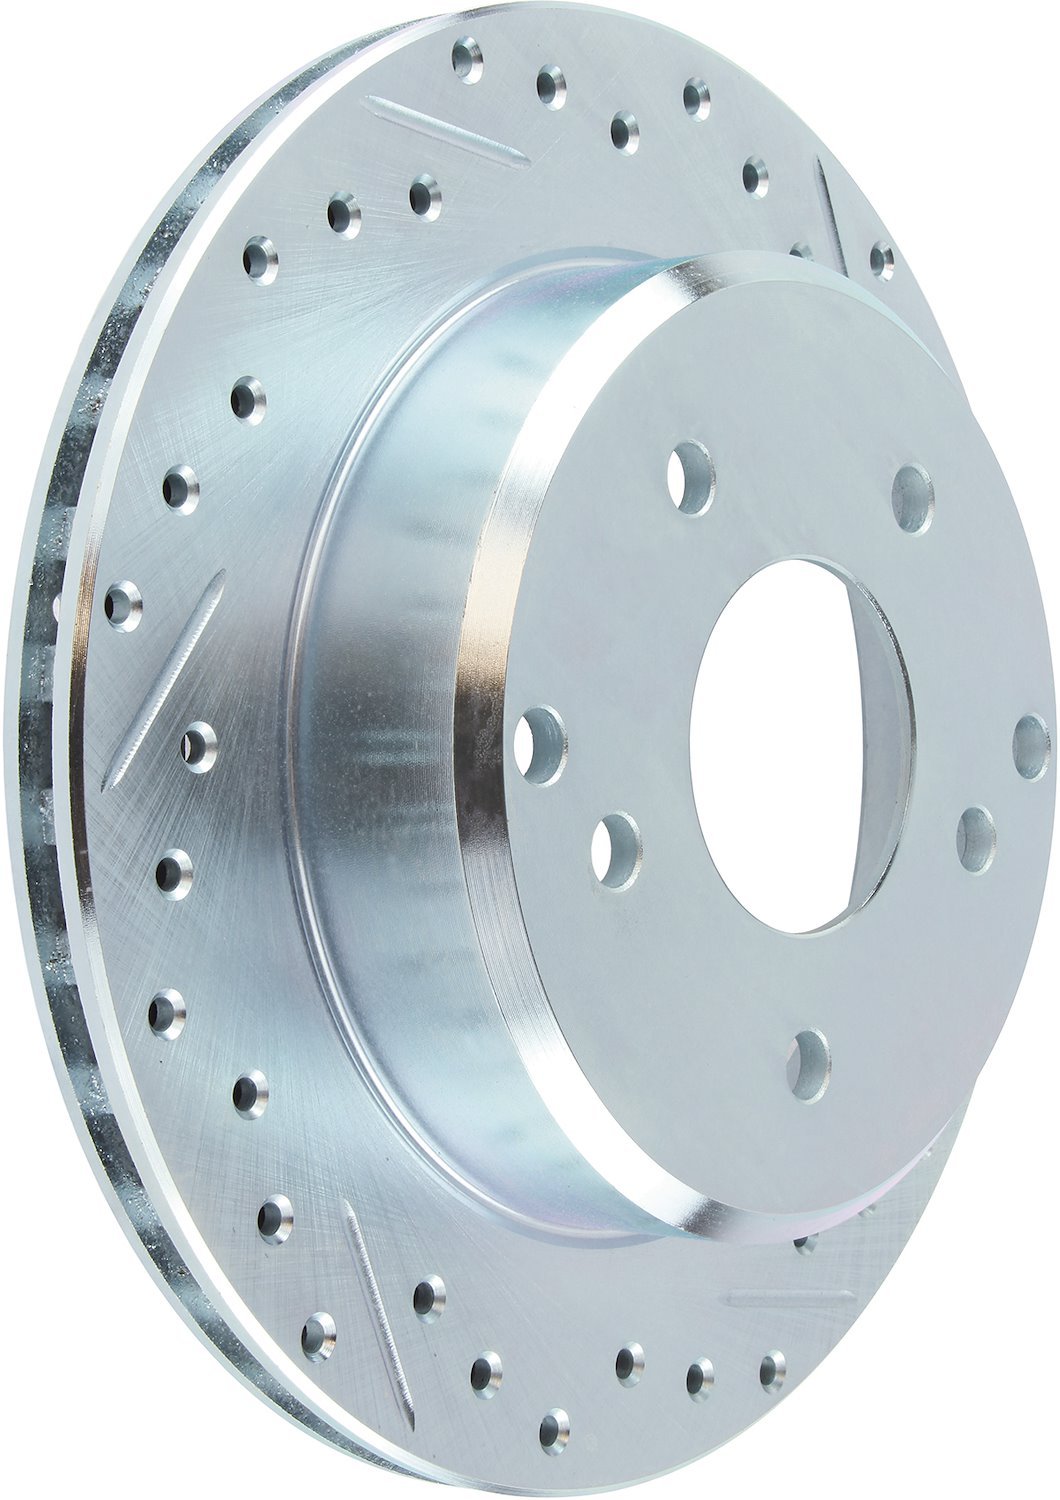 Select Sport Drilled and Slotted Front Brake Rotor Fits Select 1974-1980 Ford, Mercury Models [Right/Passenger Side]